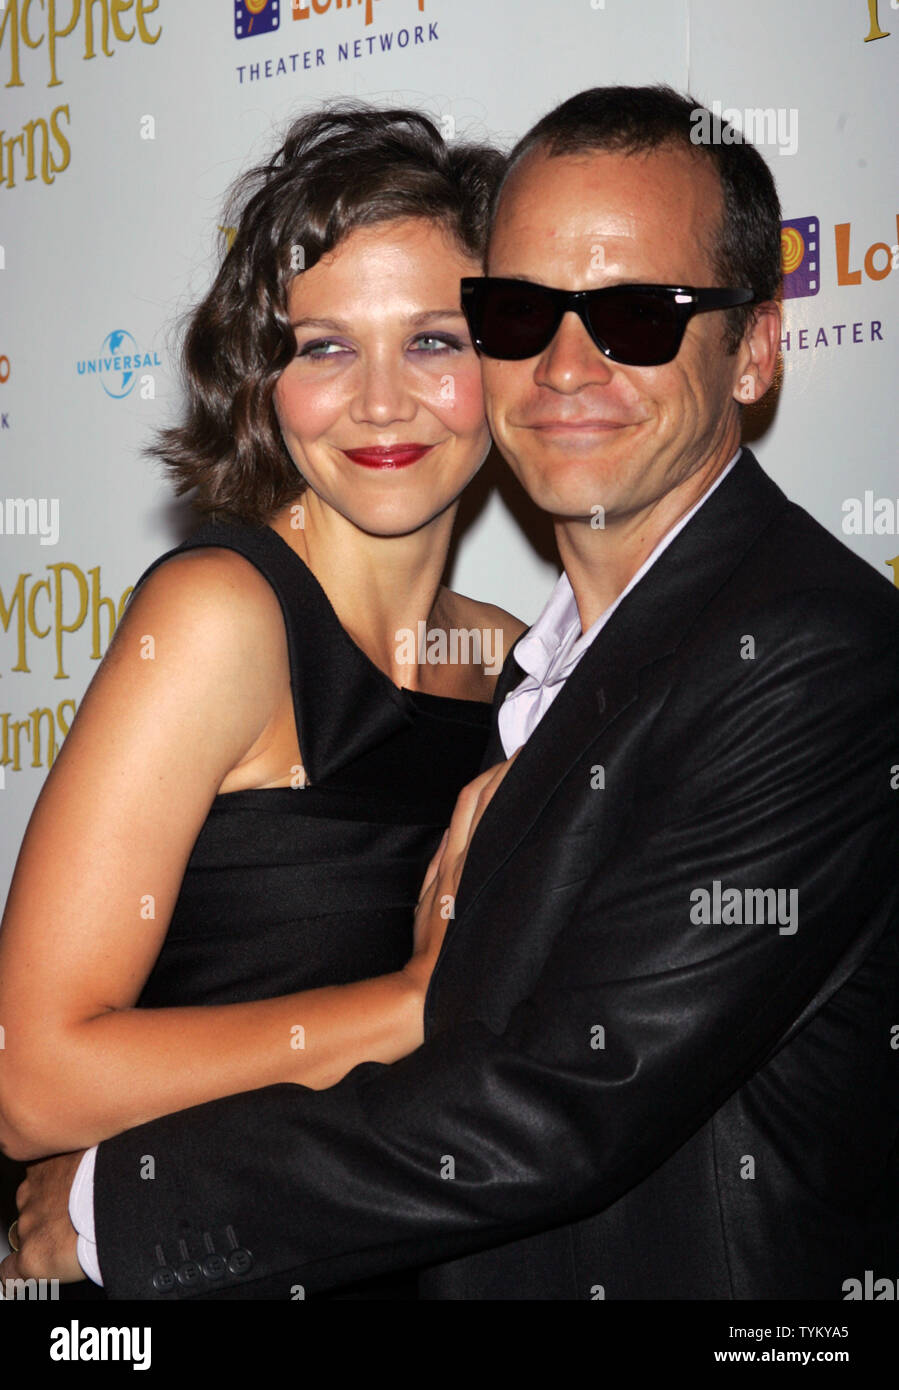 Maggie Gyllenhaal and husband Peter Sarsgaard arrive at the 'Nanny McPhee Returns' Premiere at the AMC Loews Lincoln Square Theater in New York on August 17, 2010.      UPI /Laura Cavanaugh Stock Photo